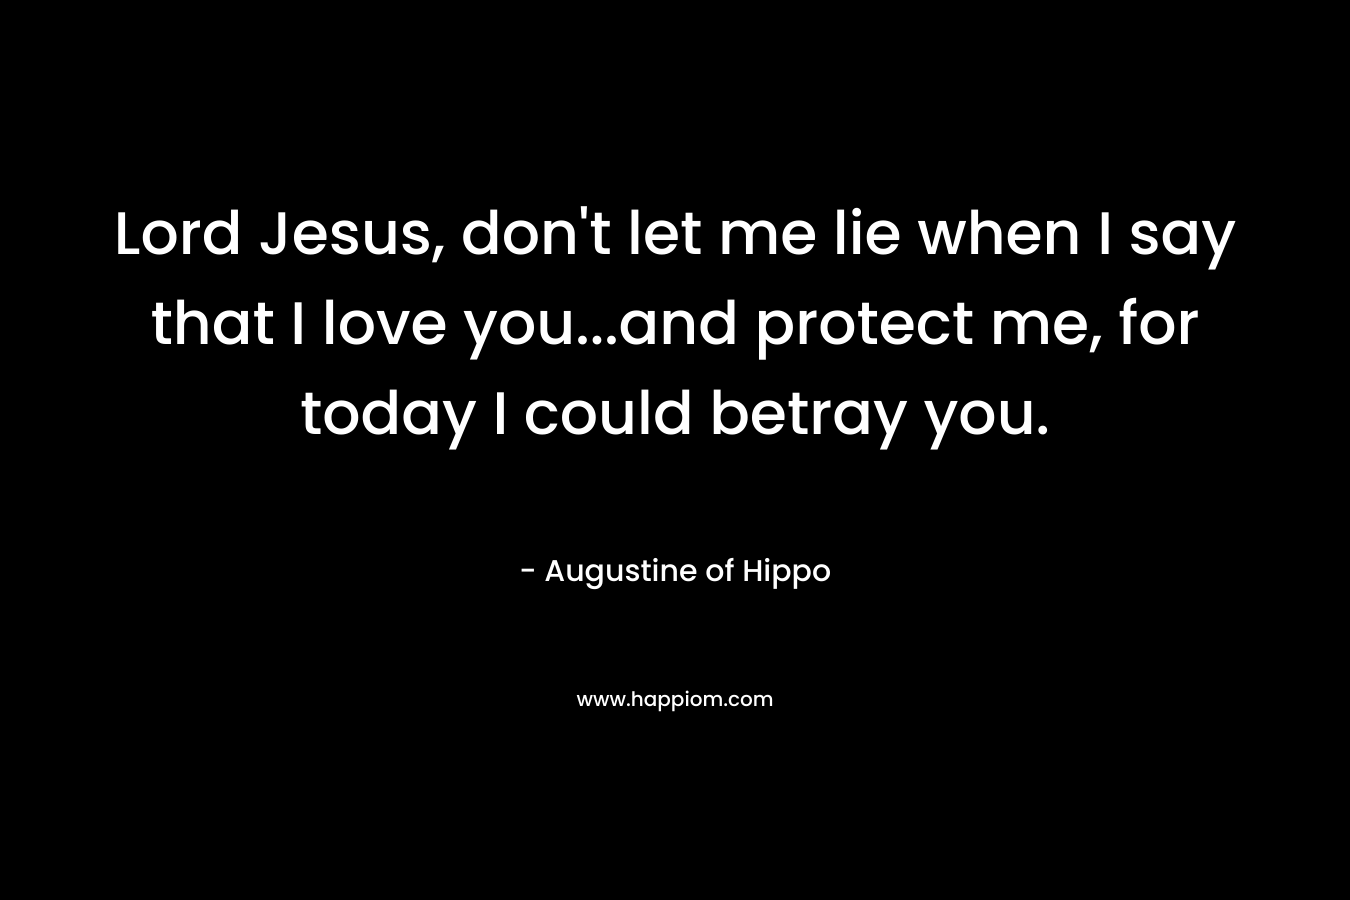 Lord Jesus, don't let me lie when I say that I love you...and protect me, for today I could betray you.